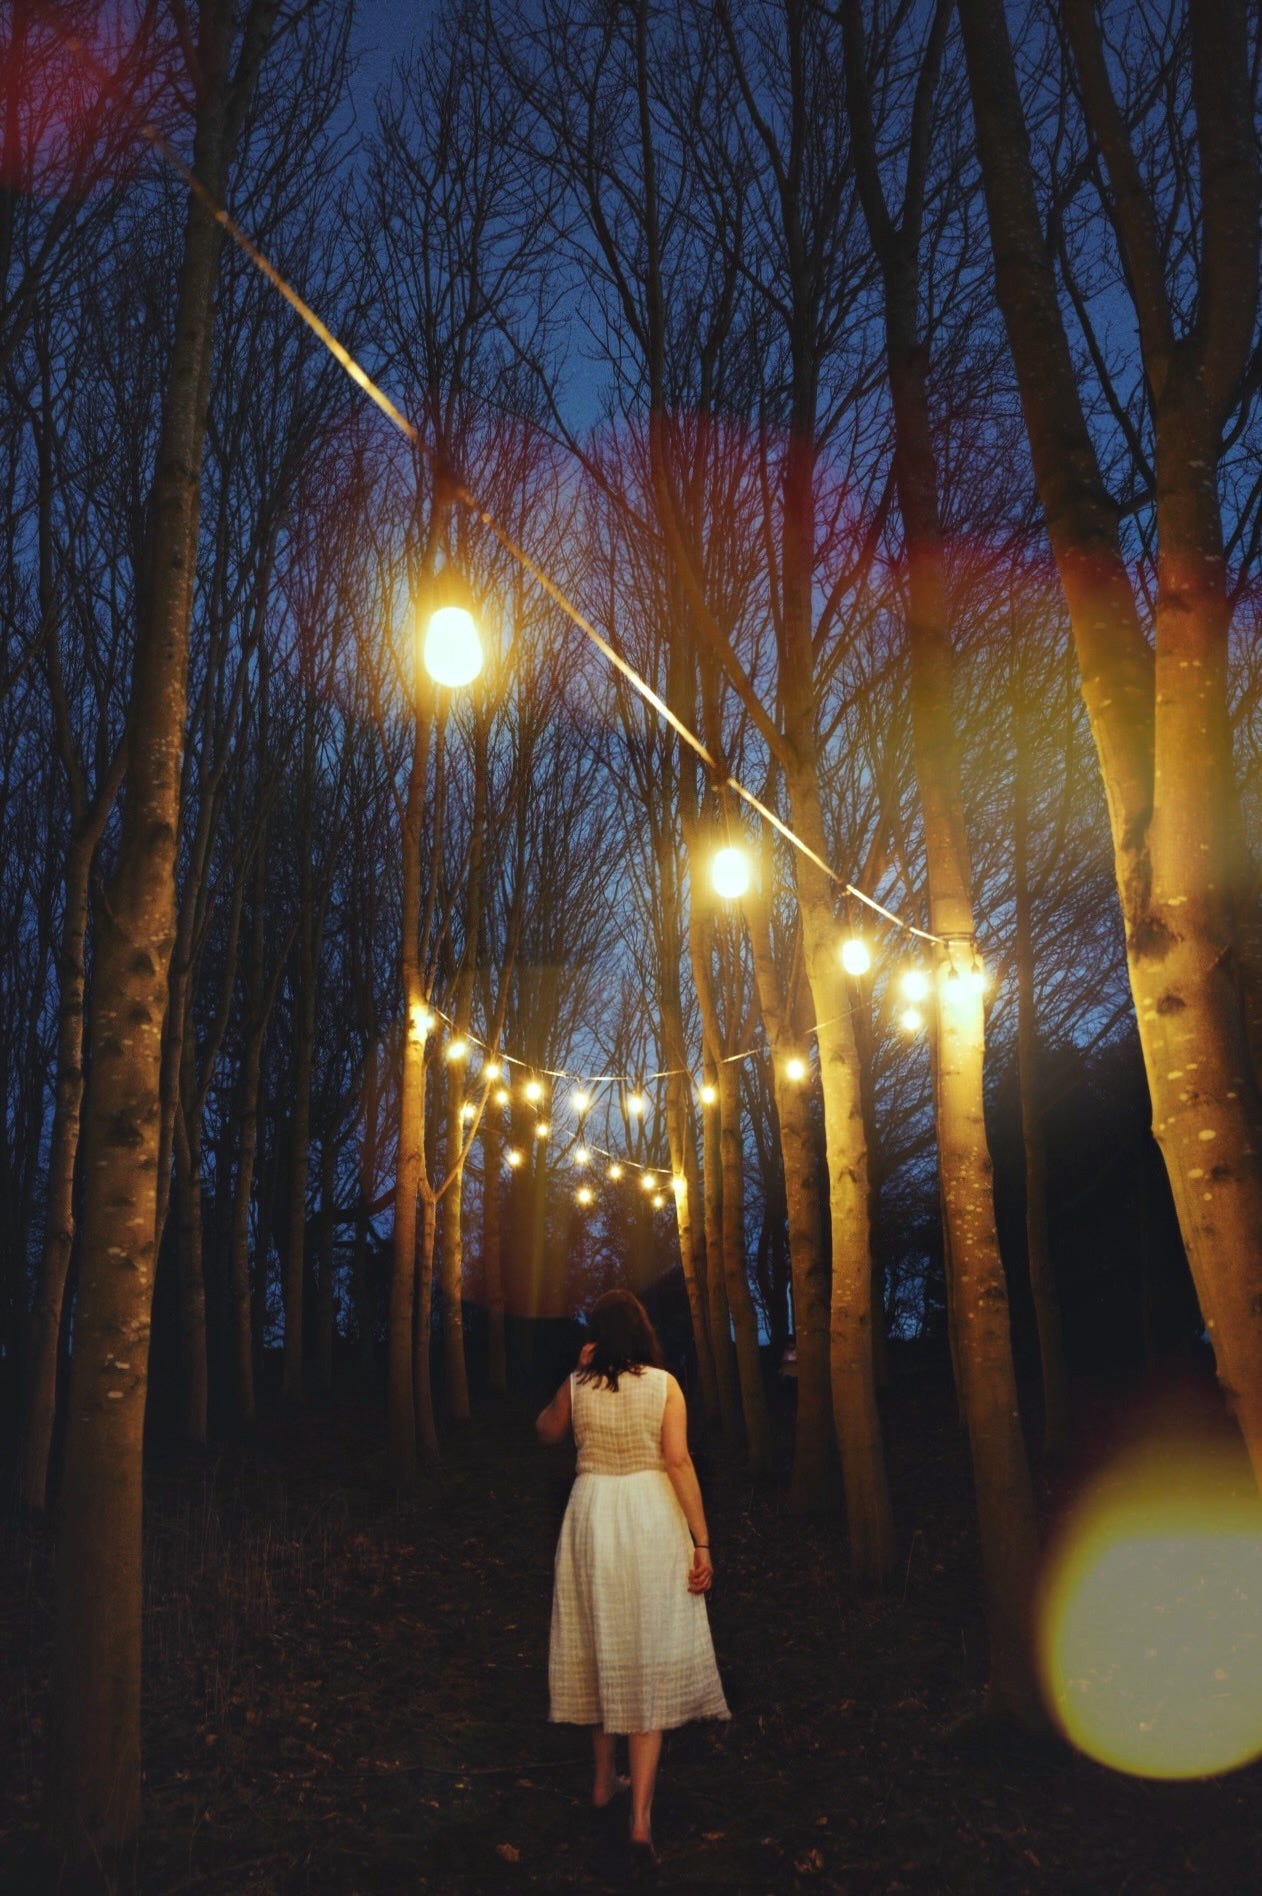 me, walking barefoot through a forest at night. Yellow lights are strung overhead to light my path.